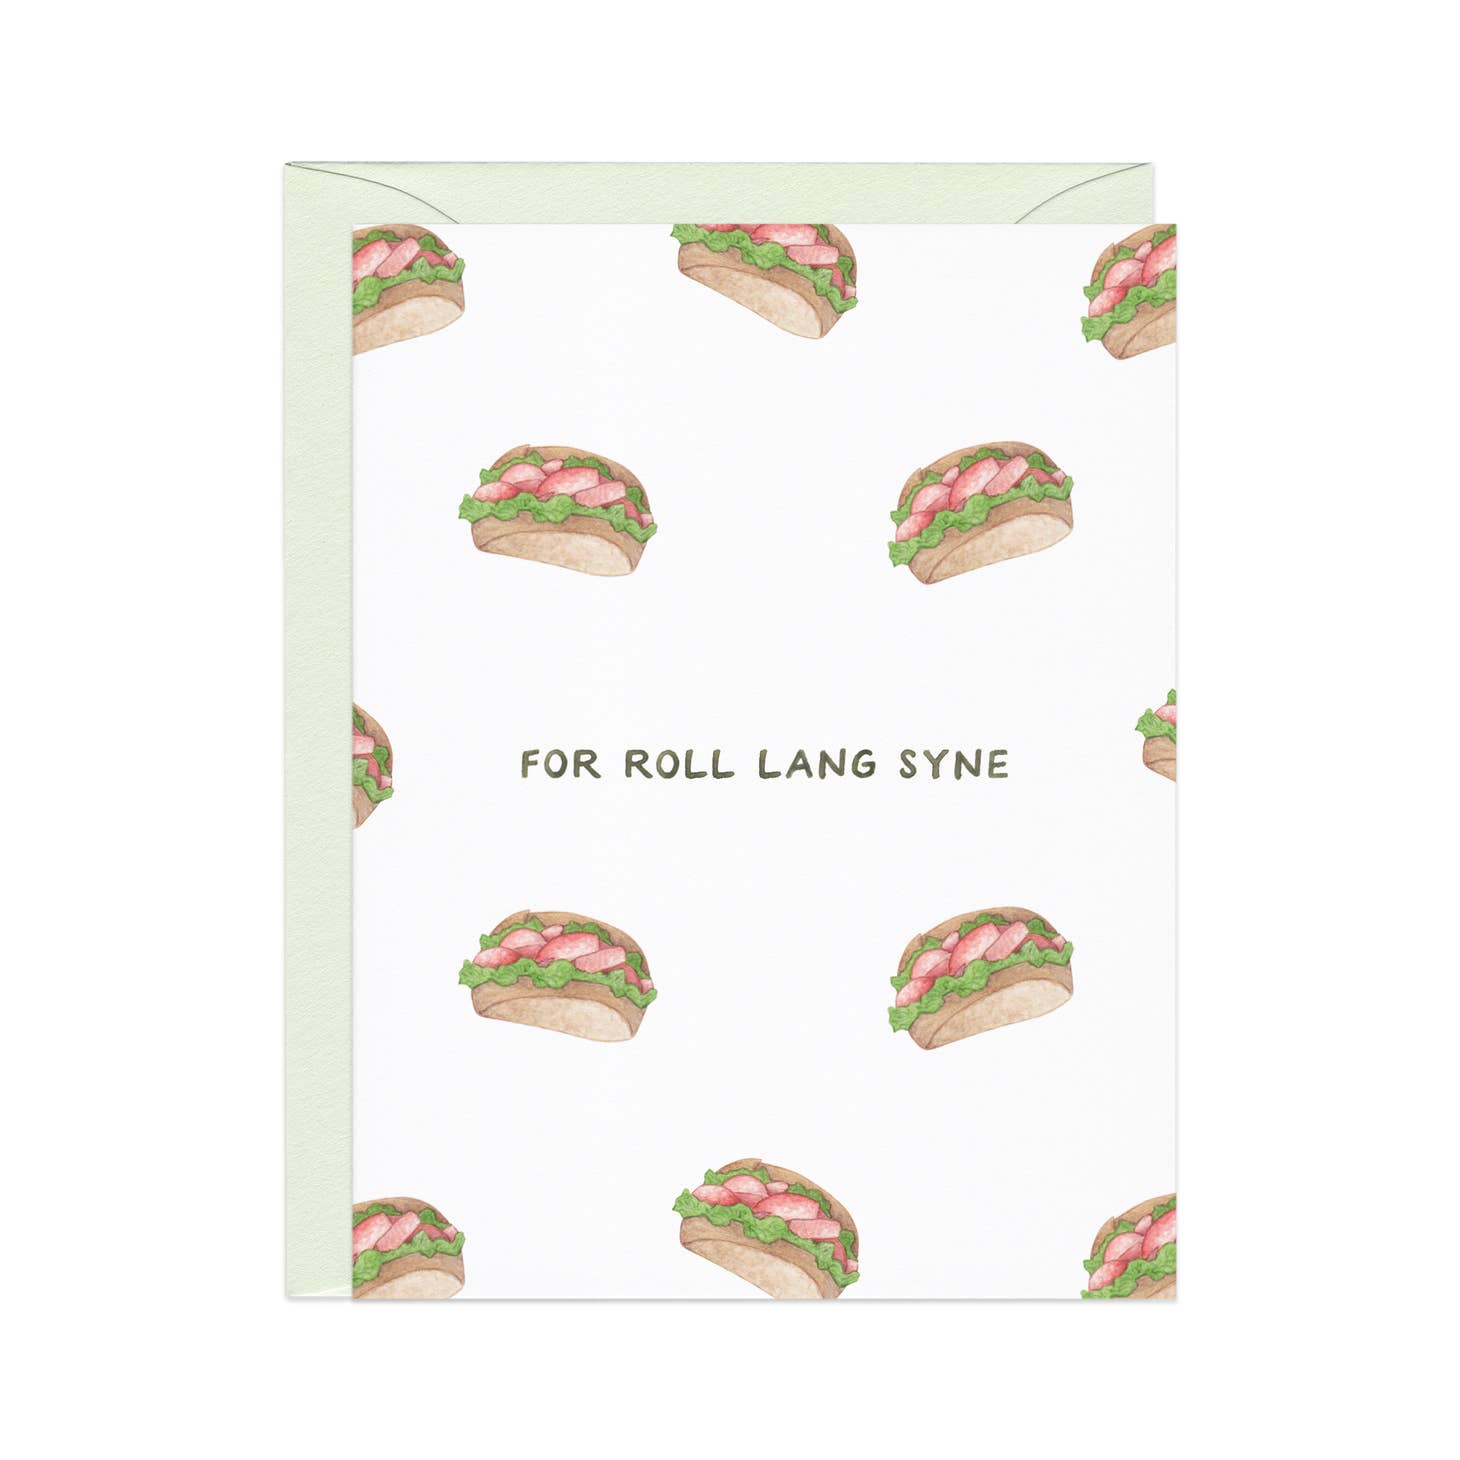 White background with images of lobster rolls and black text says, "For roll lang syne". Mint envelope included. 